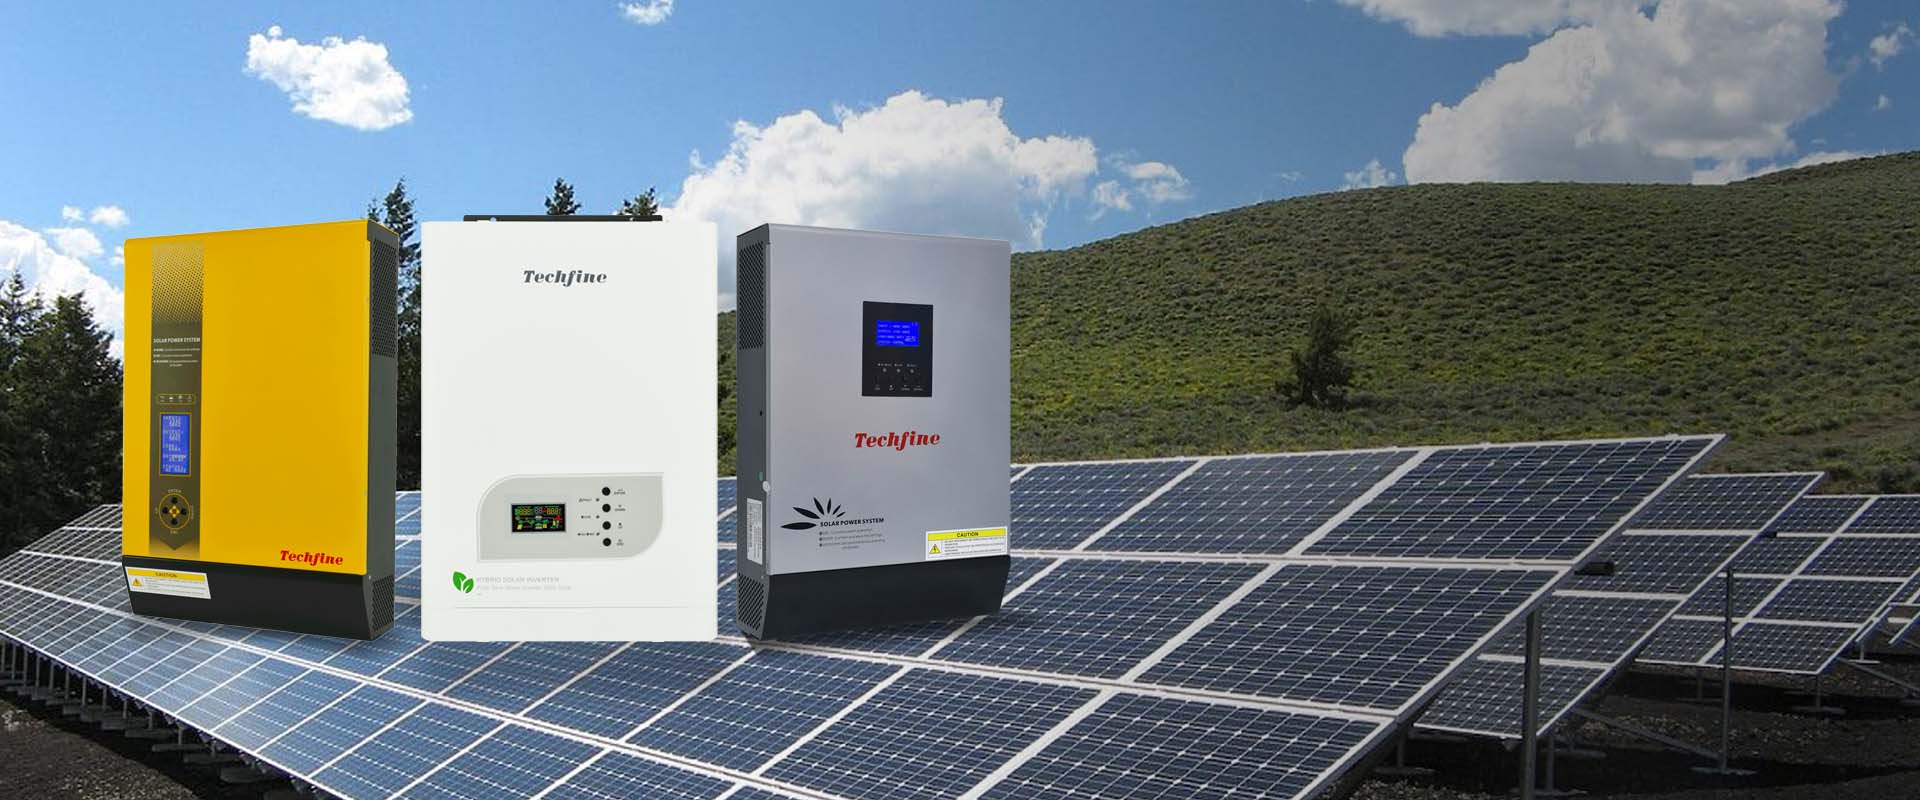 Low frequency solar inverter